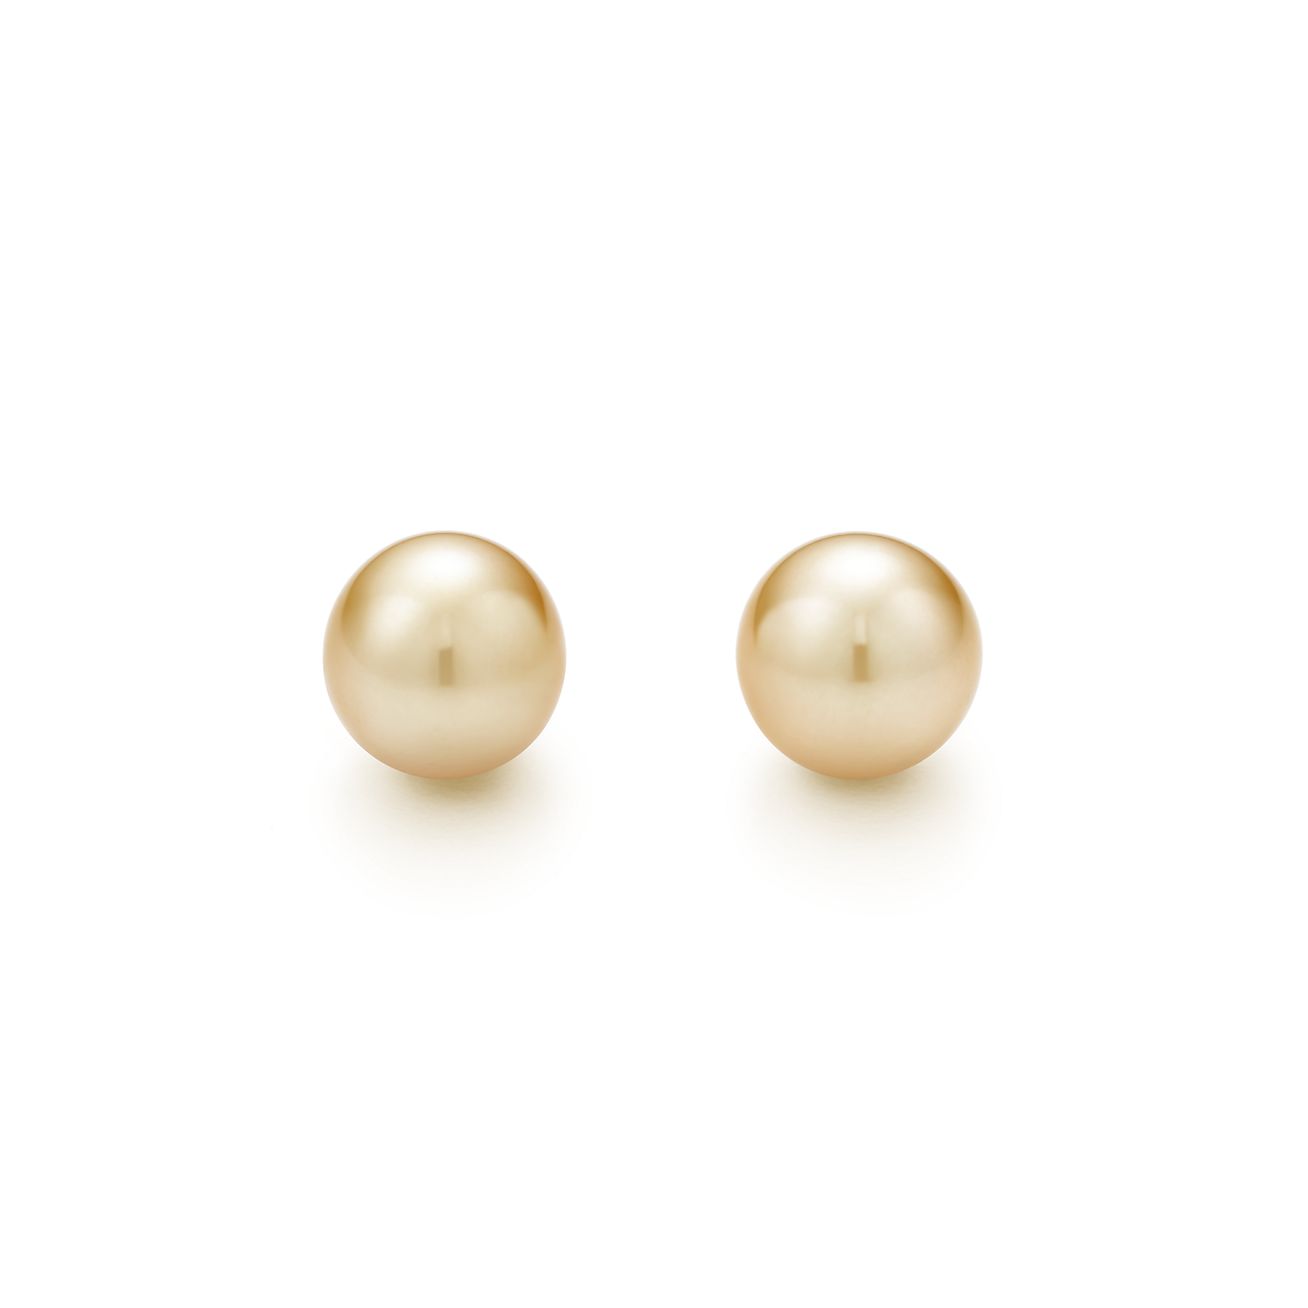 Tiffany South Sea pearl earrings with 